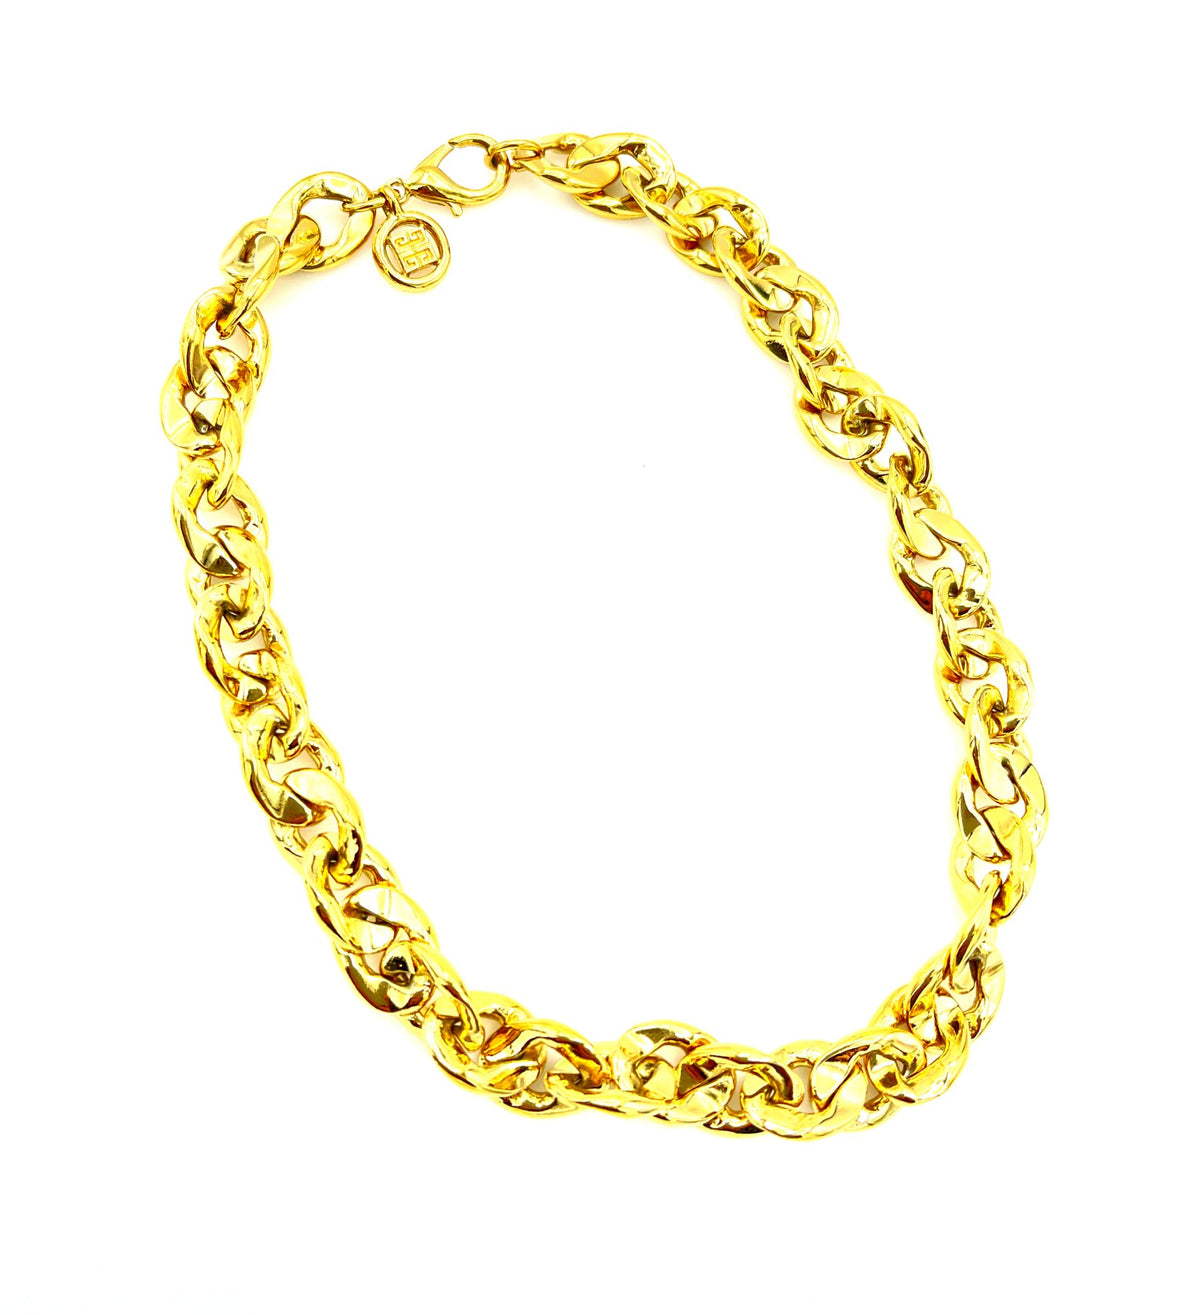 Givenchy Gold Chain Vintage Necklace - 24 Wishes Vintage Jewelry